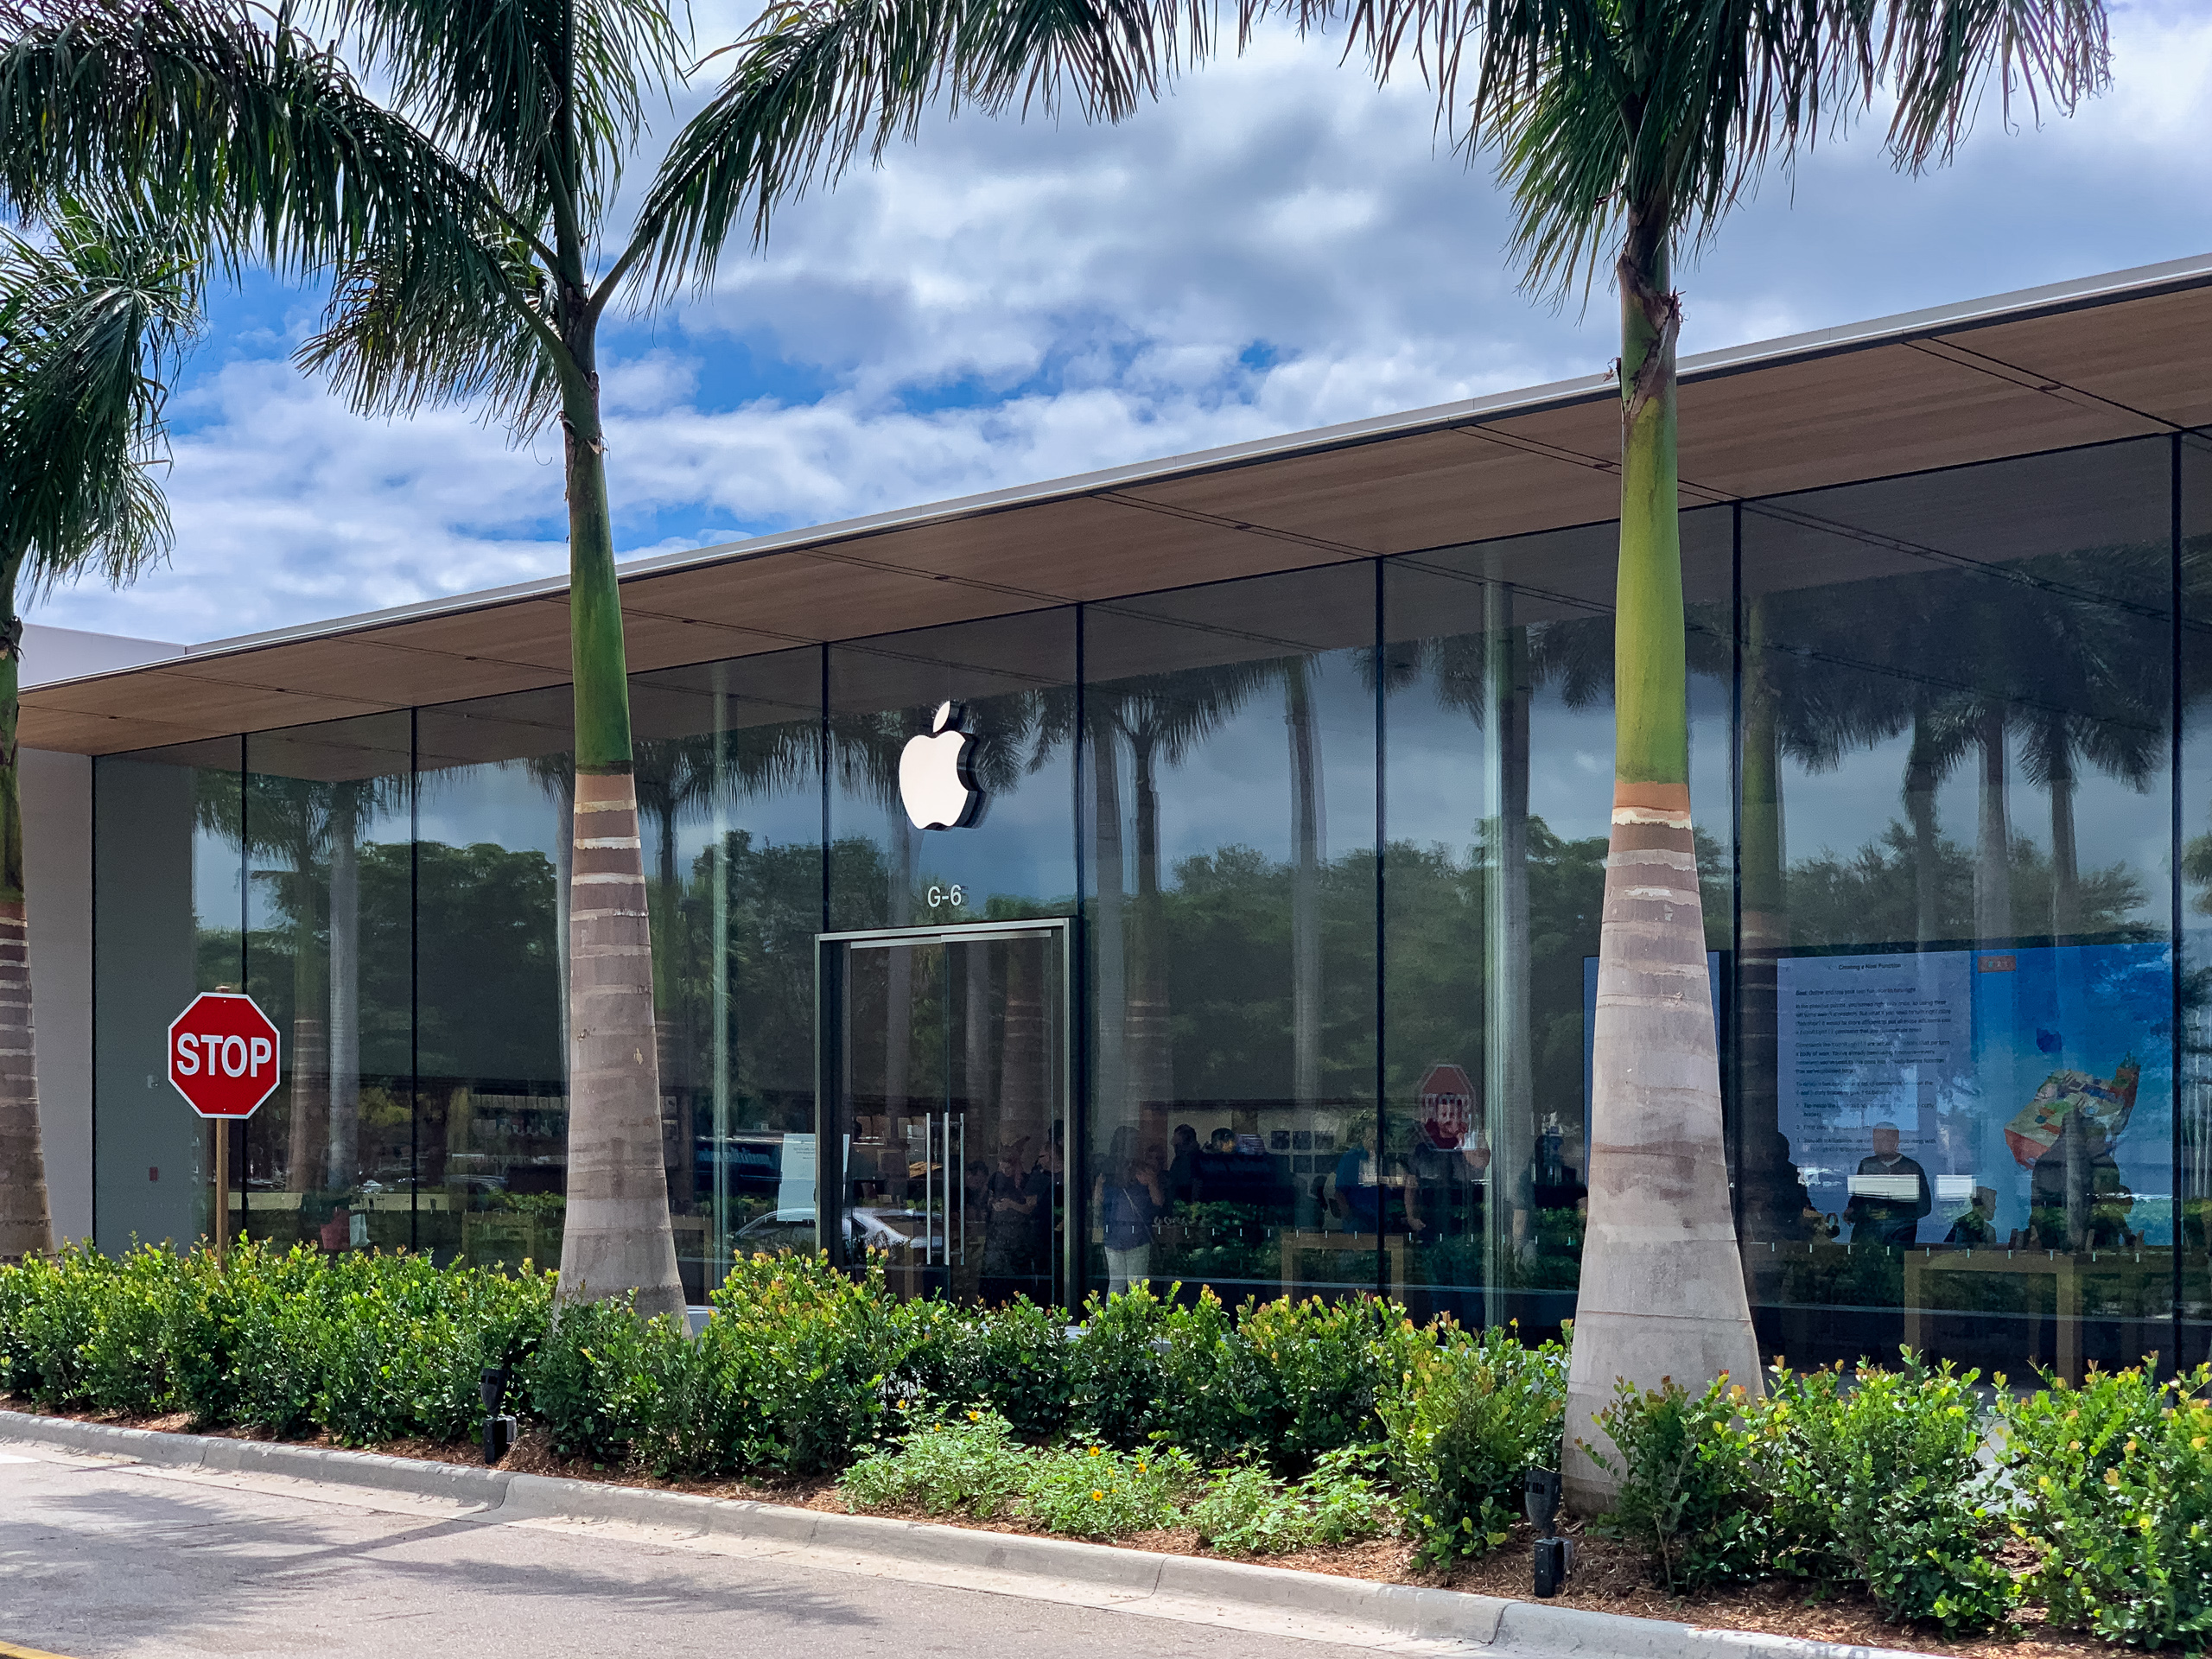 Photos: Waterside Shops Apple Store reopens with new design - 9to5Mac